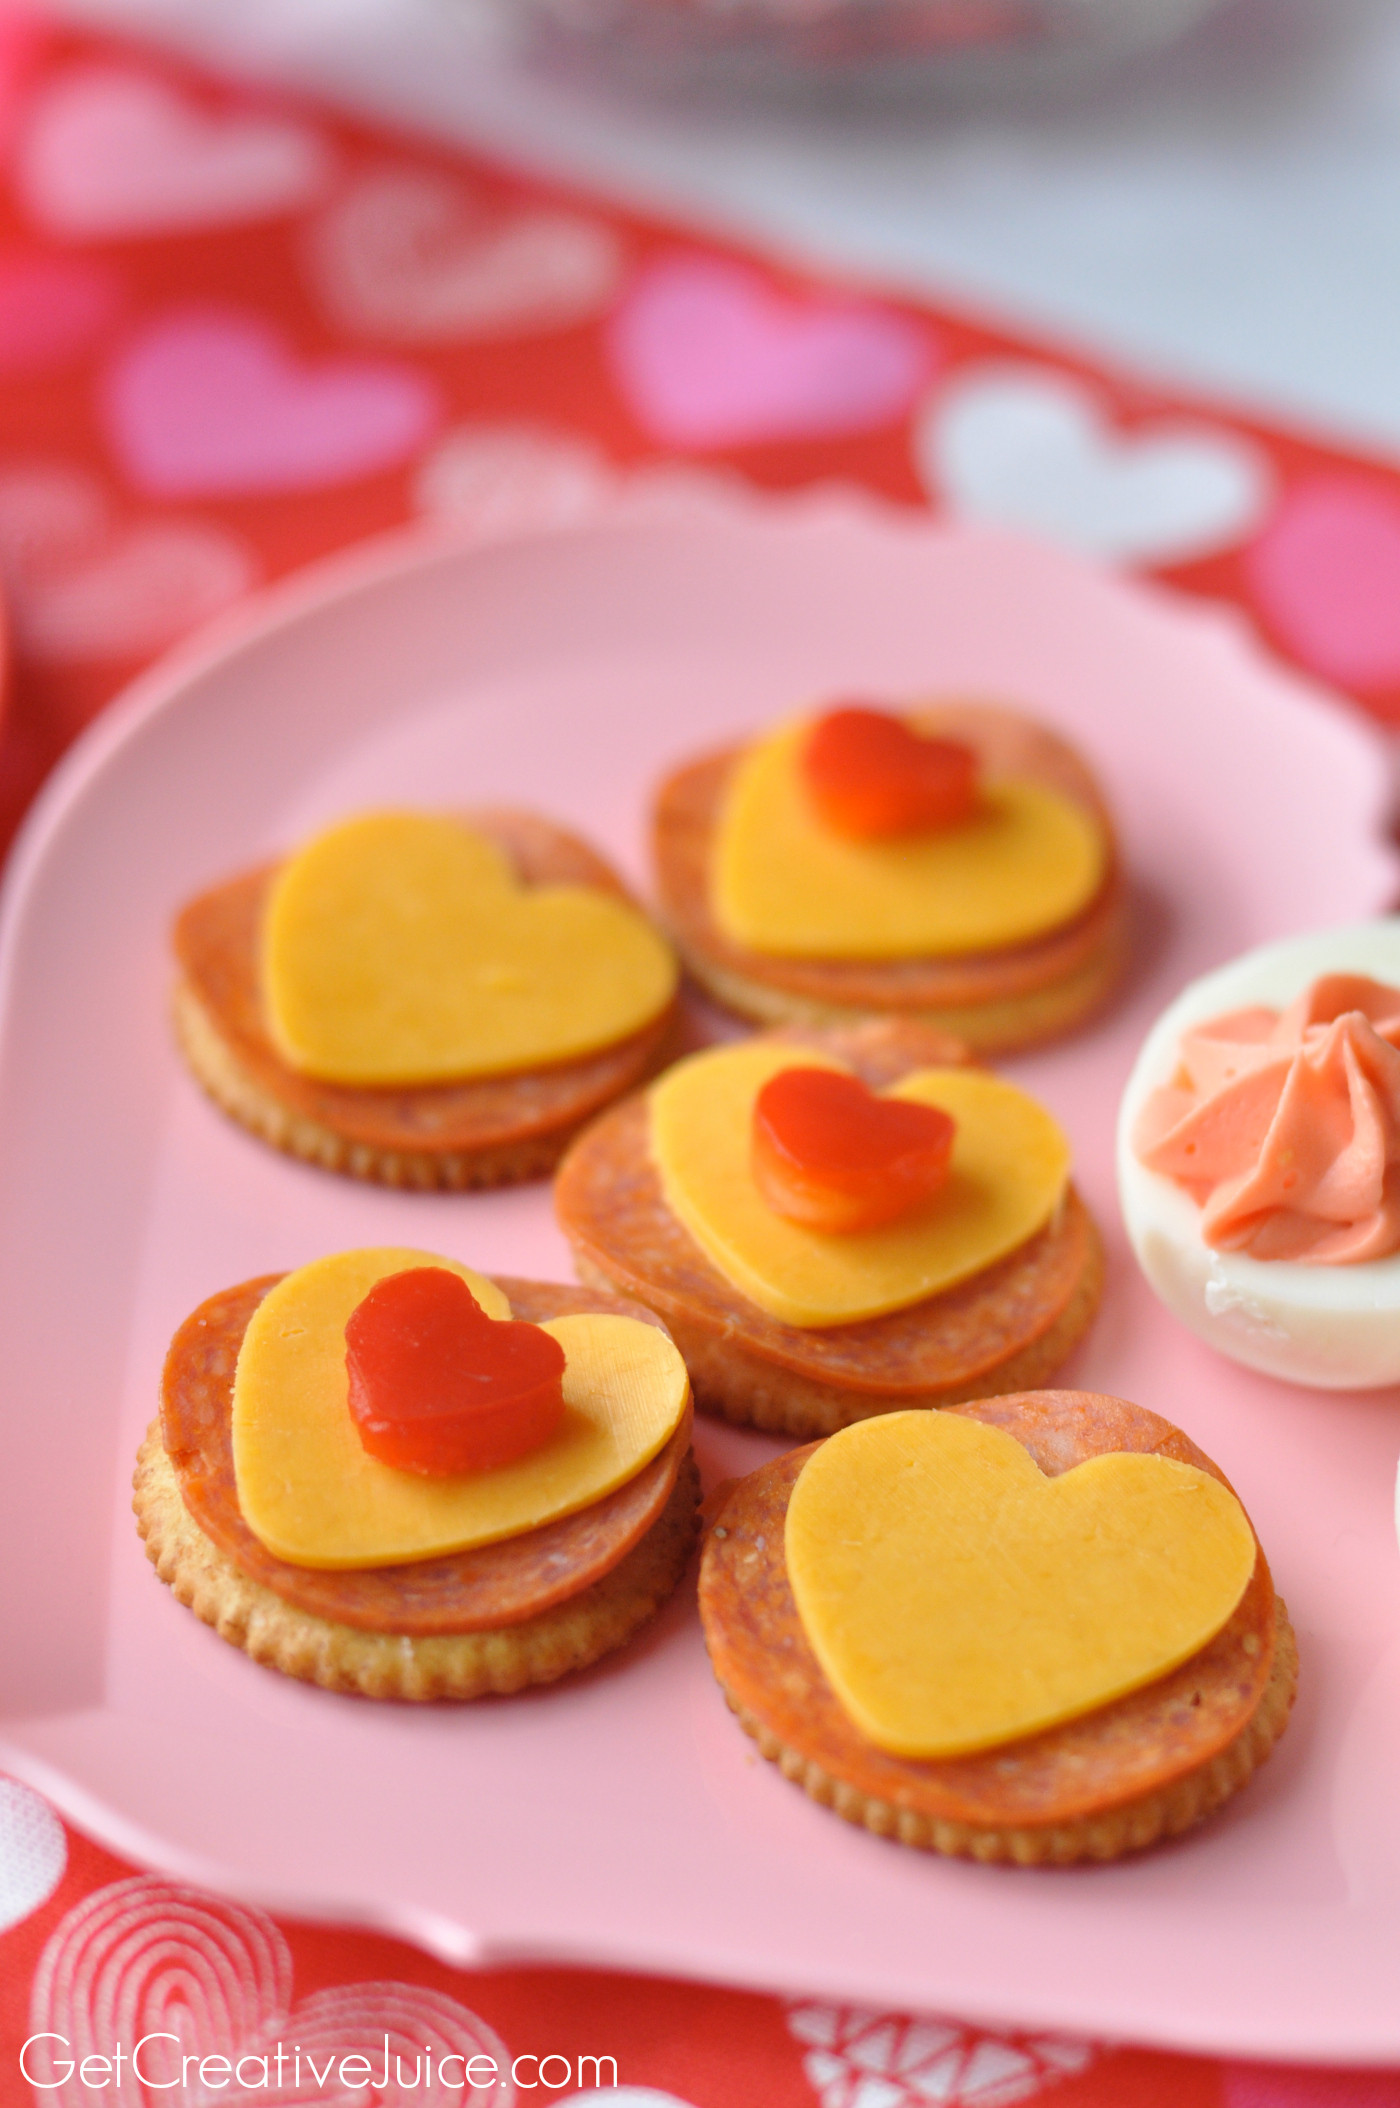 Valentines Day Snack Ideas
 Valentine Lunch Ideas and Snack Ideas Creative Juice